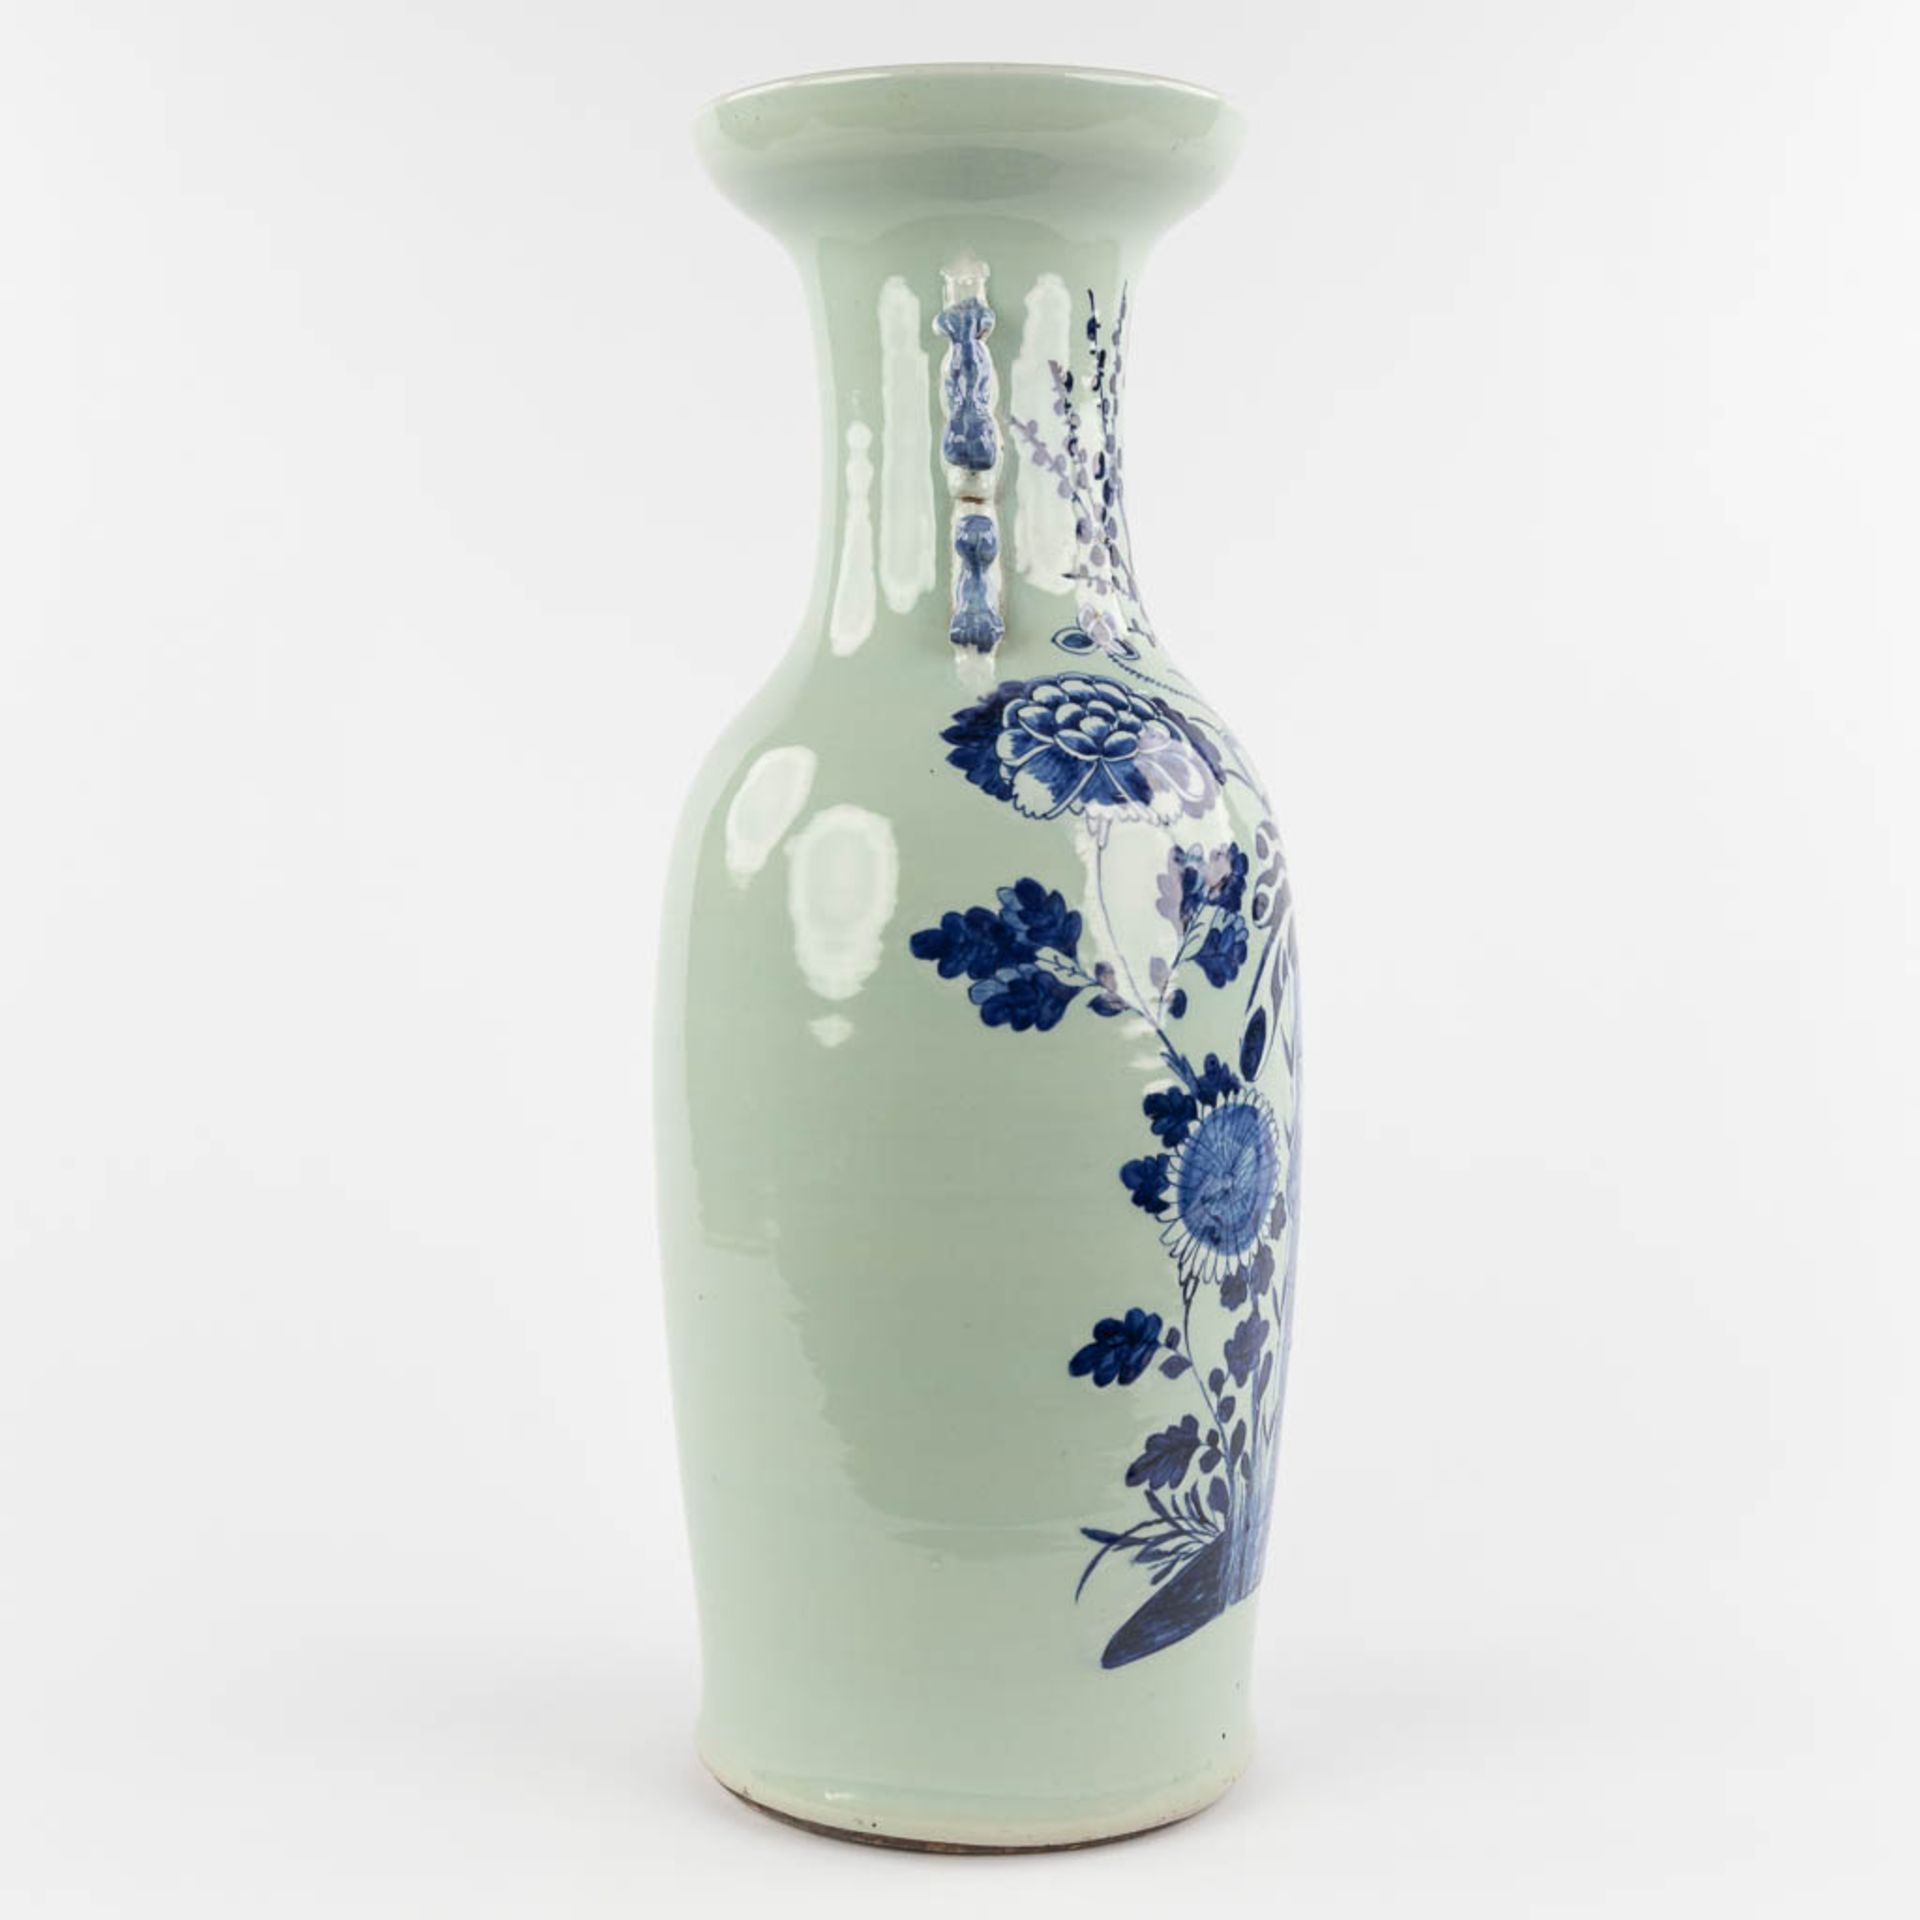 A Chinese Celadon vase with floral decor. 19th/20th C. (H:59 x D:21 cm) - Image 4 of 11